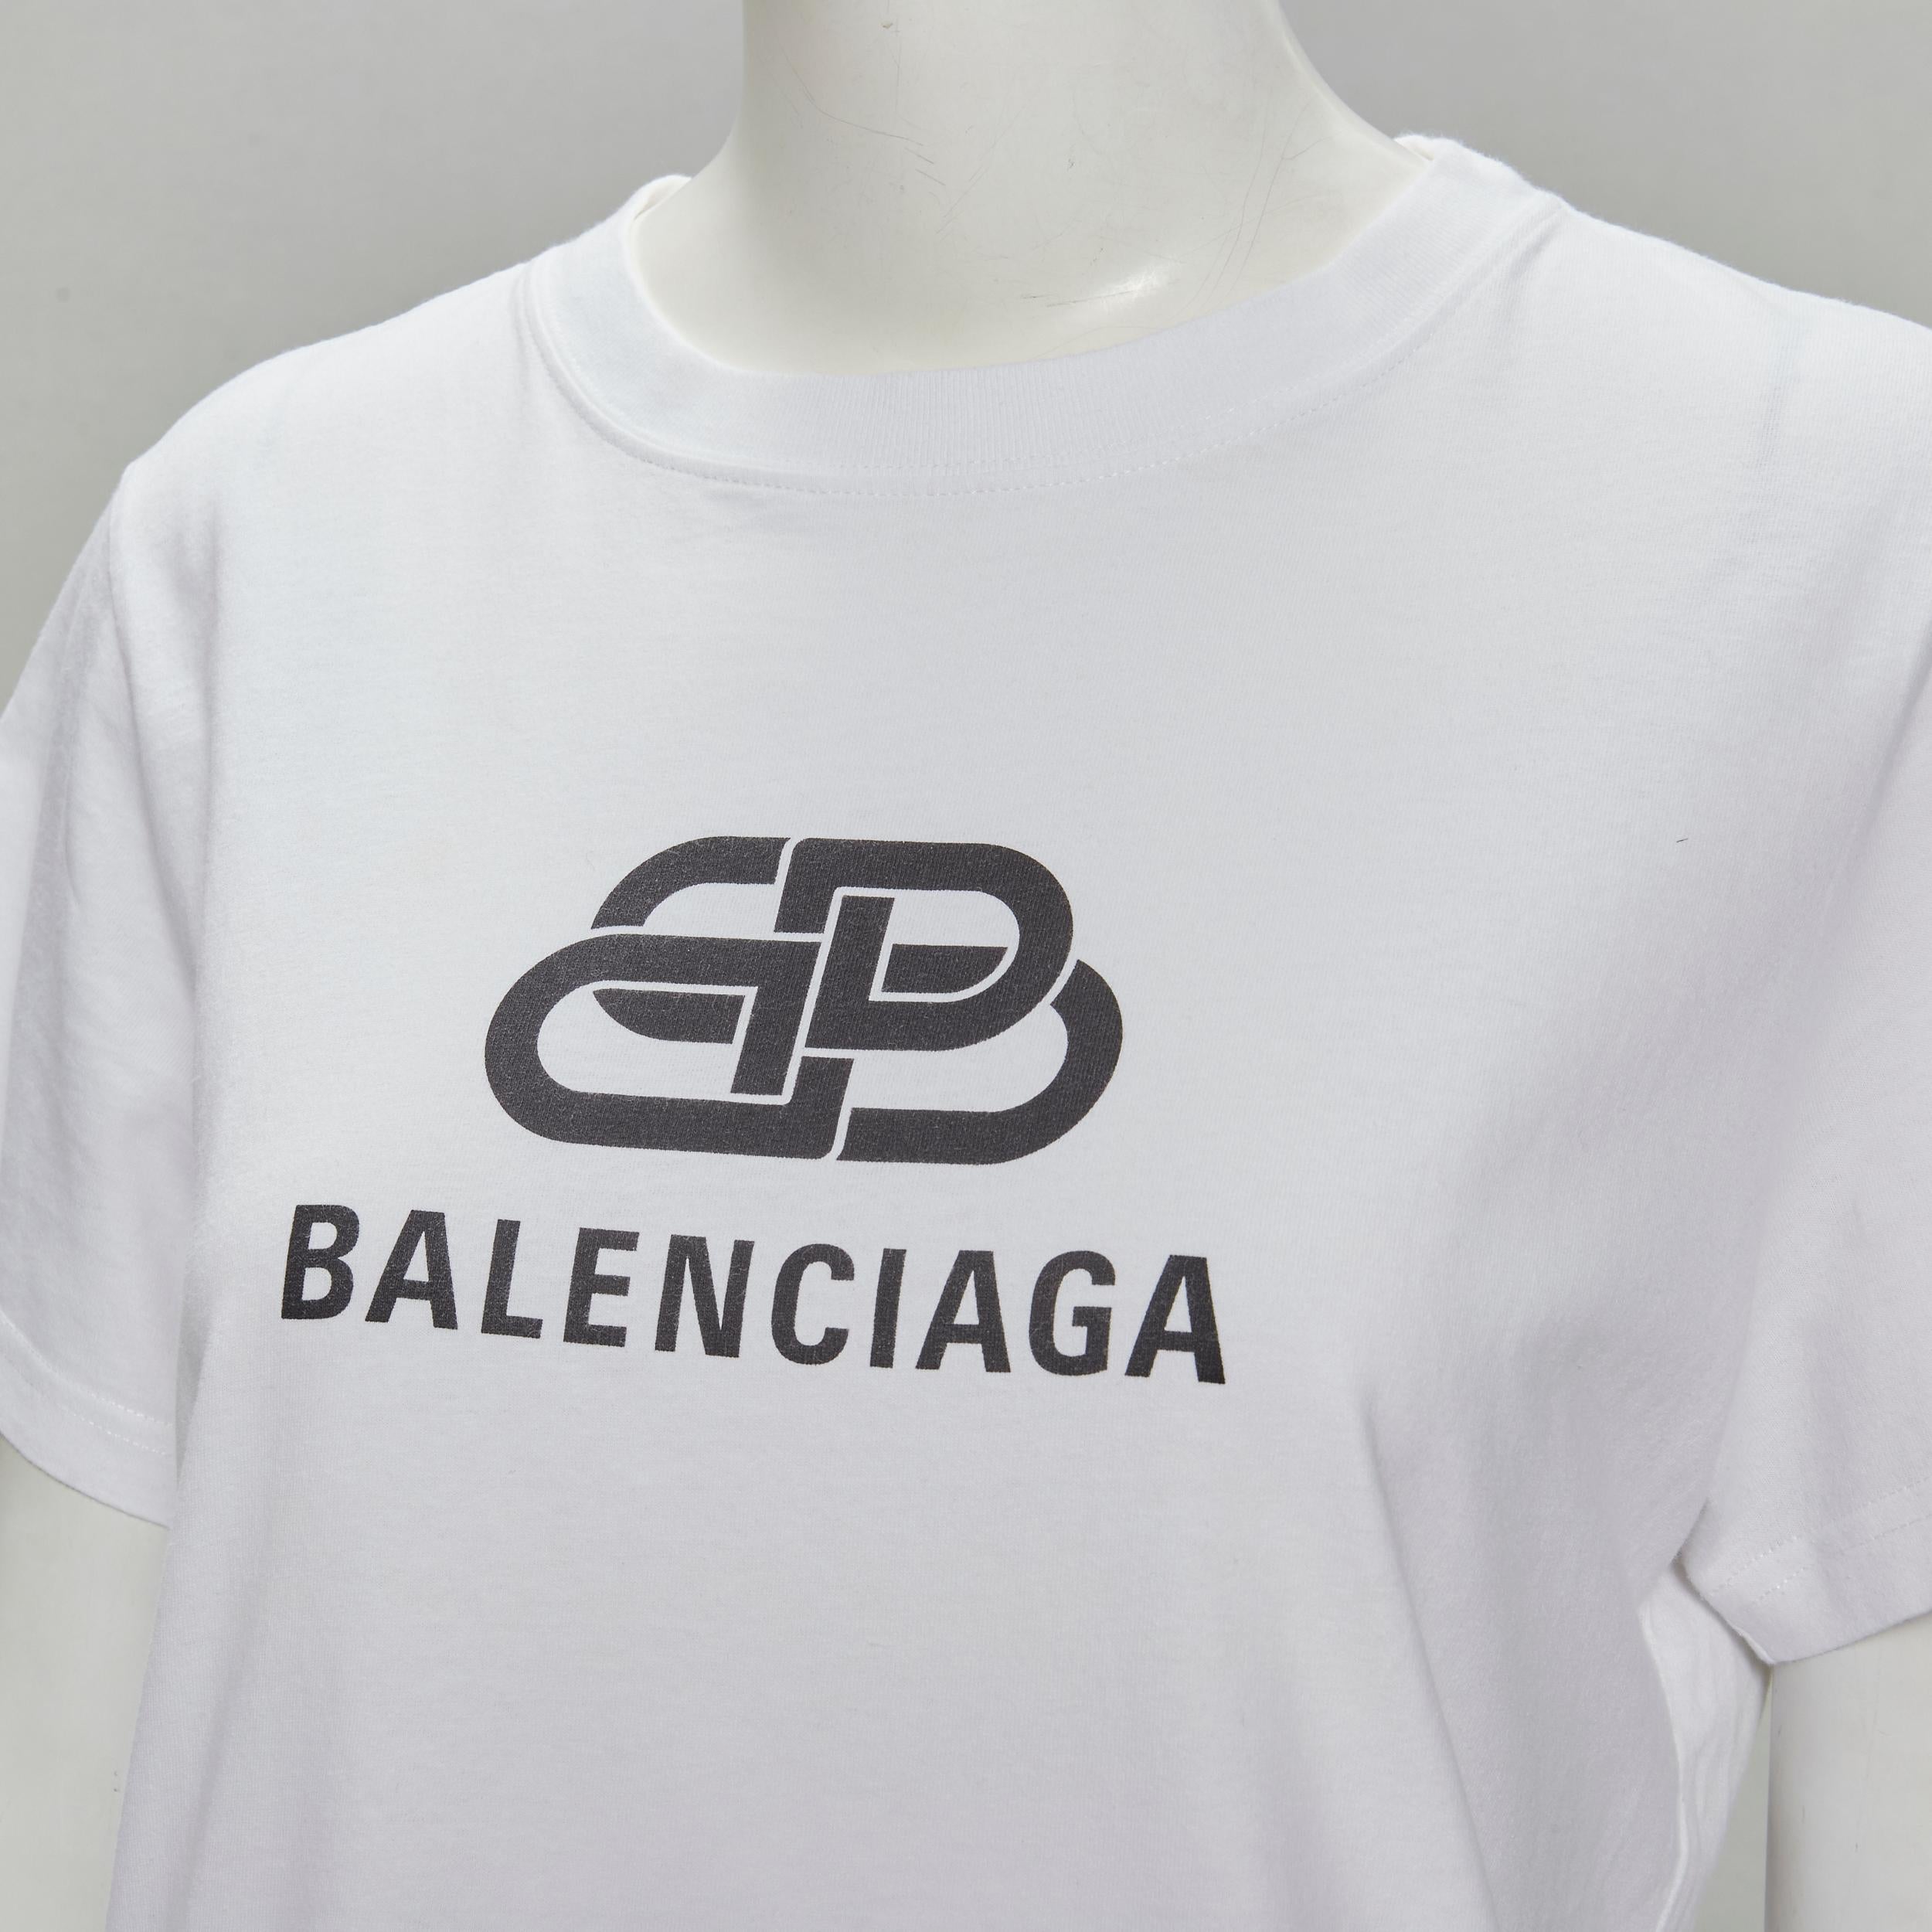 BALENCIAGA DEMNA 2018 white BB logo print tshirt L
Brand: Balenciaga
Designer: Demna
Collection: 2018 
Material: Cotton
Color: White
Pattern: Solid
Made in: Portugal

CONDITION:
Condition: Very good, this item was pre-owned and is in very good